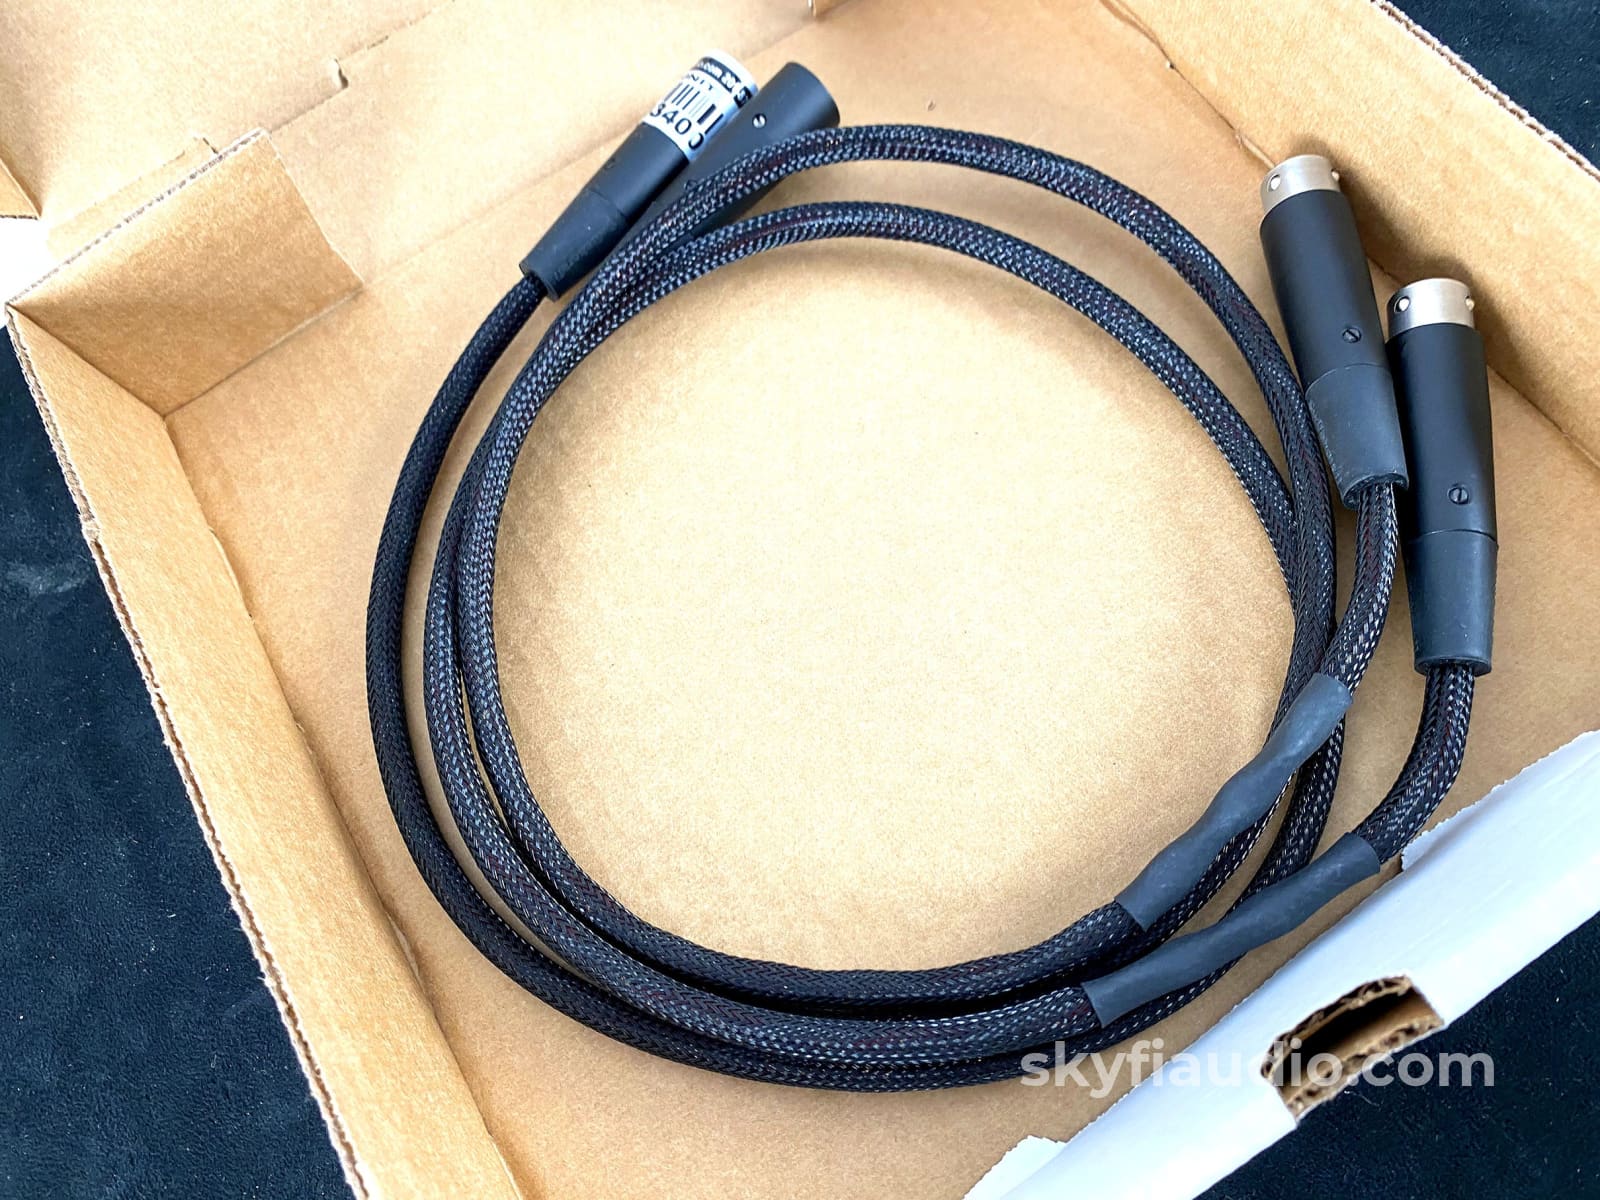 Kimber Kable Ascent Series - Hero Xlr Audio Interconnects 1M Cables